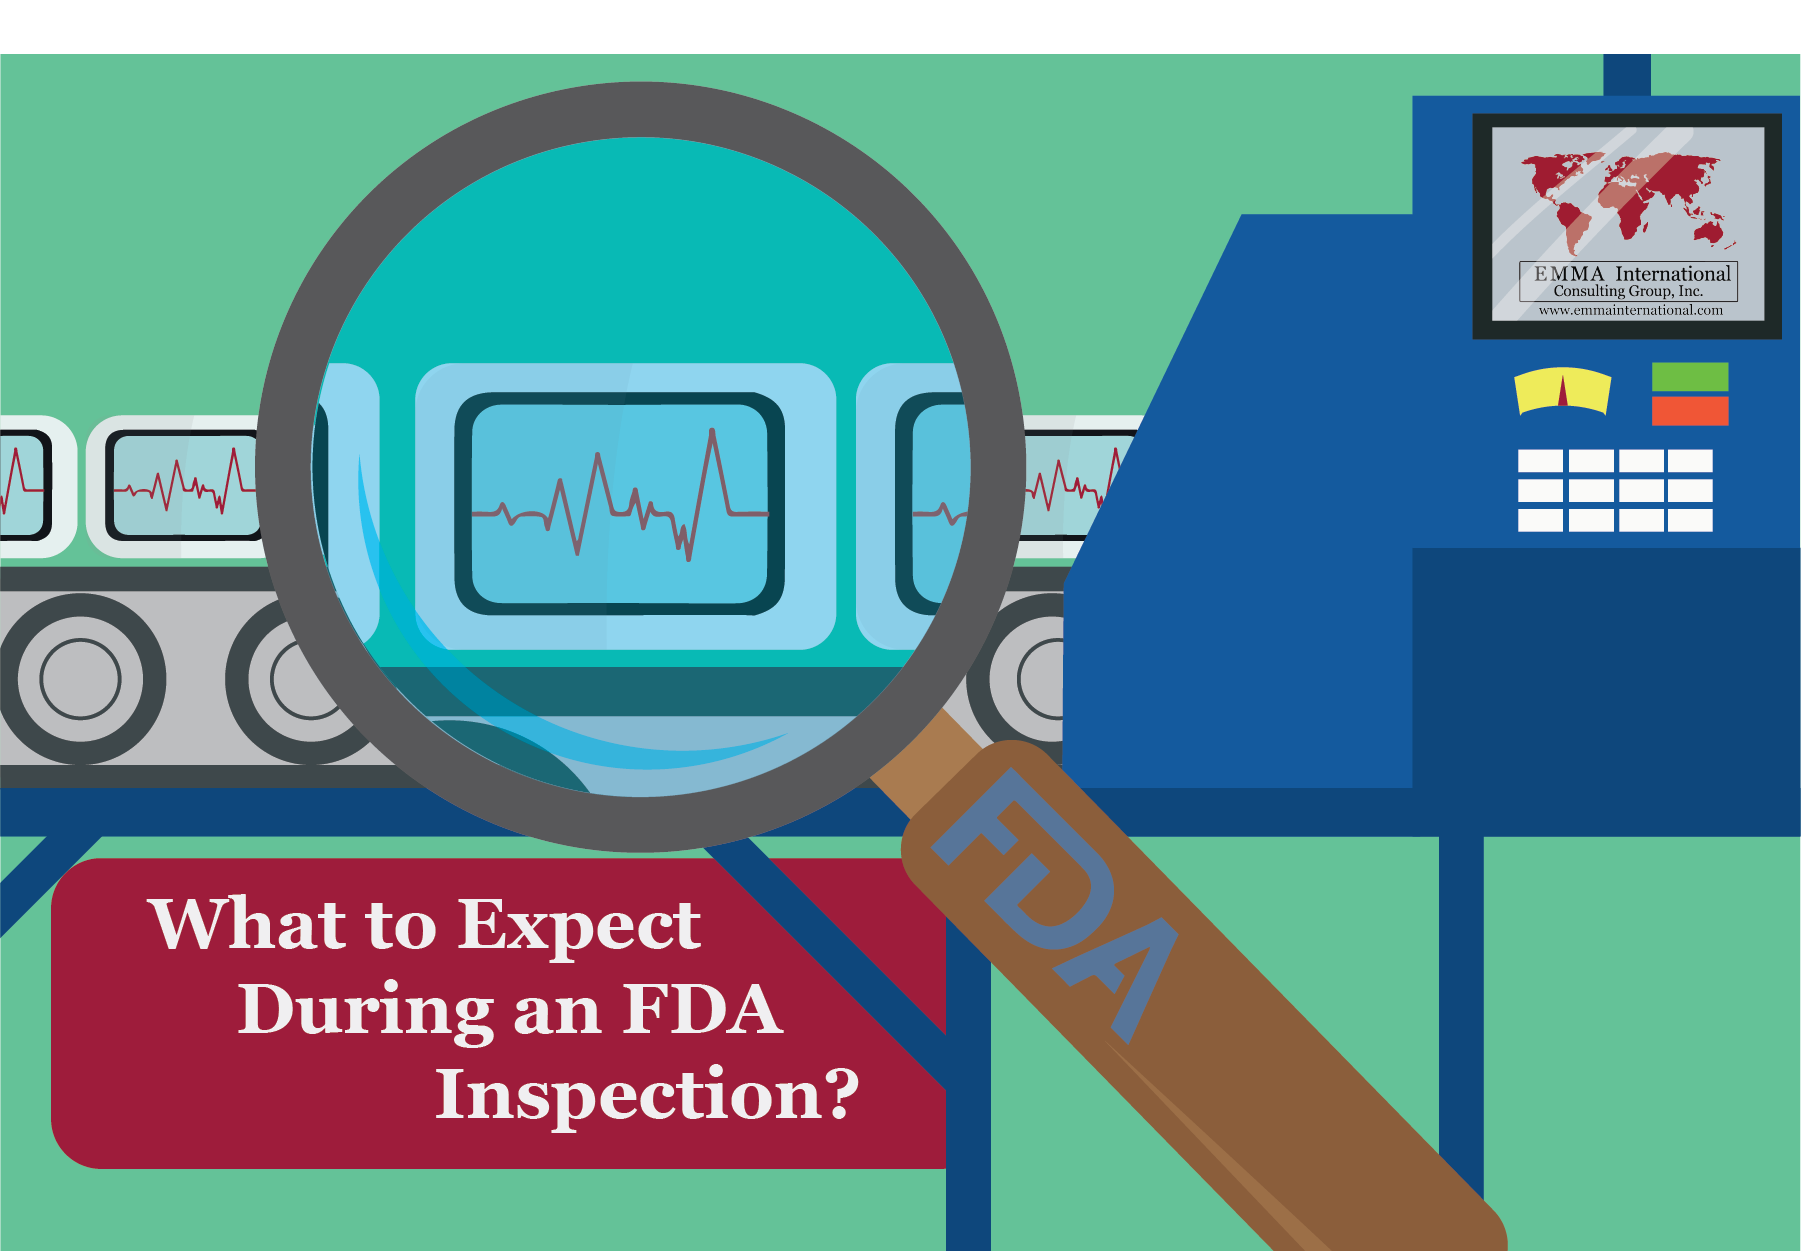 What to Expect During an FDA Inspection?